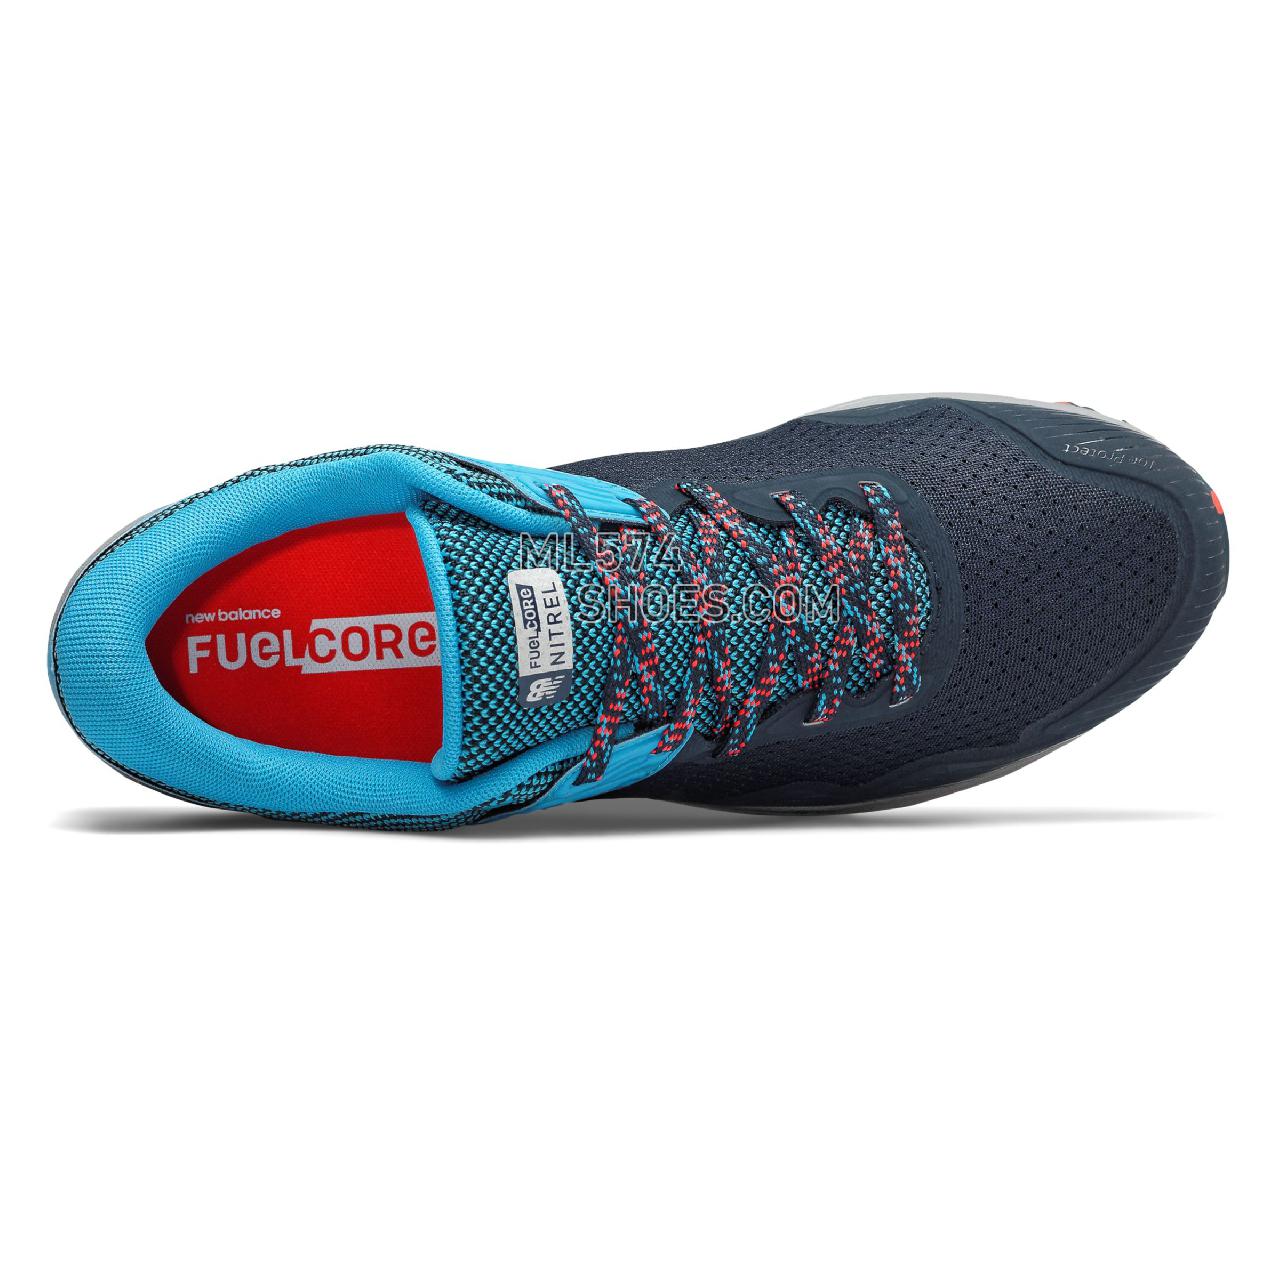 New Balance FuelCore NITRELv2 - Men's 2 - Running Galaxy with Polaris and Flame - MTNTRLG2